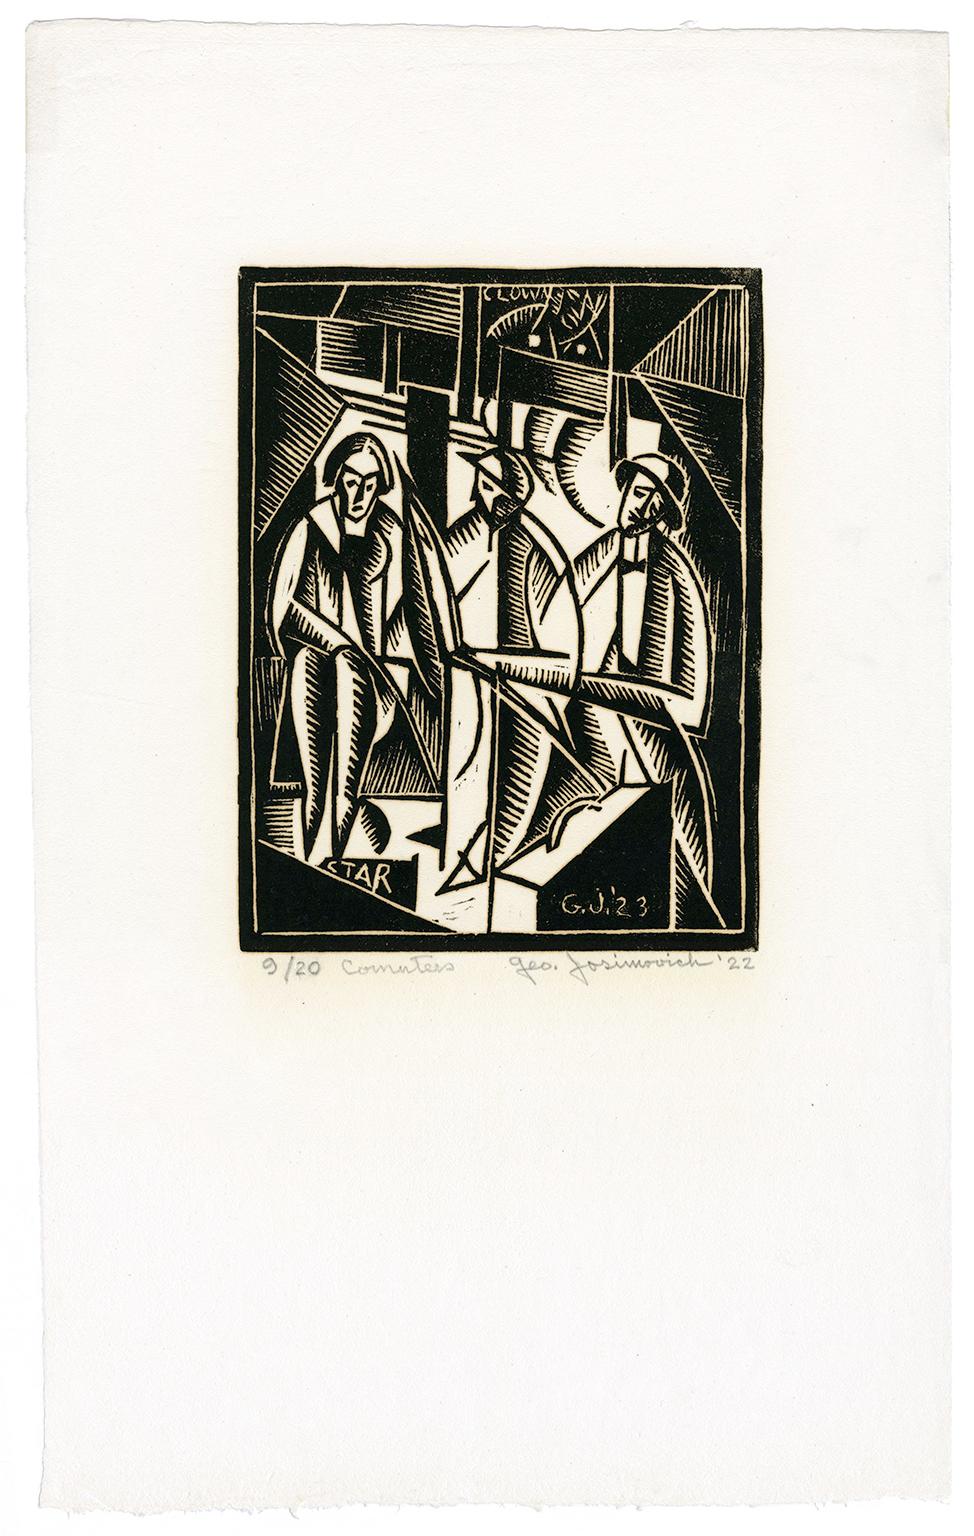 'Commuters' — Early 20th-Century Modernism - Print by George Josimovich